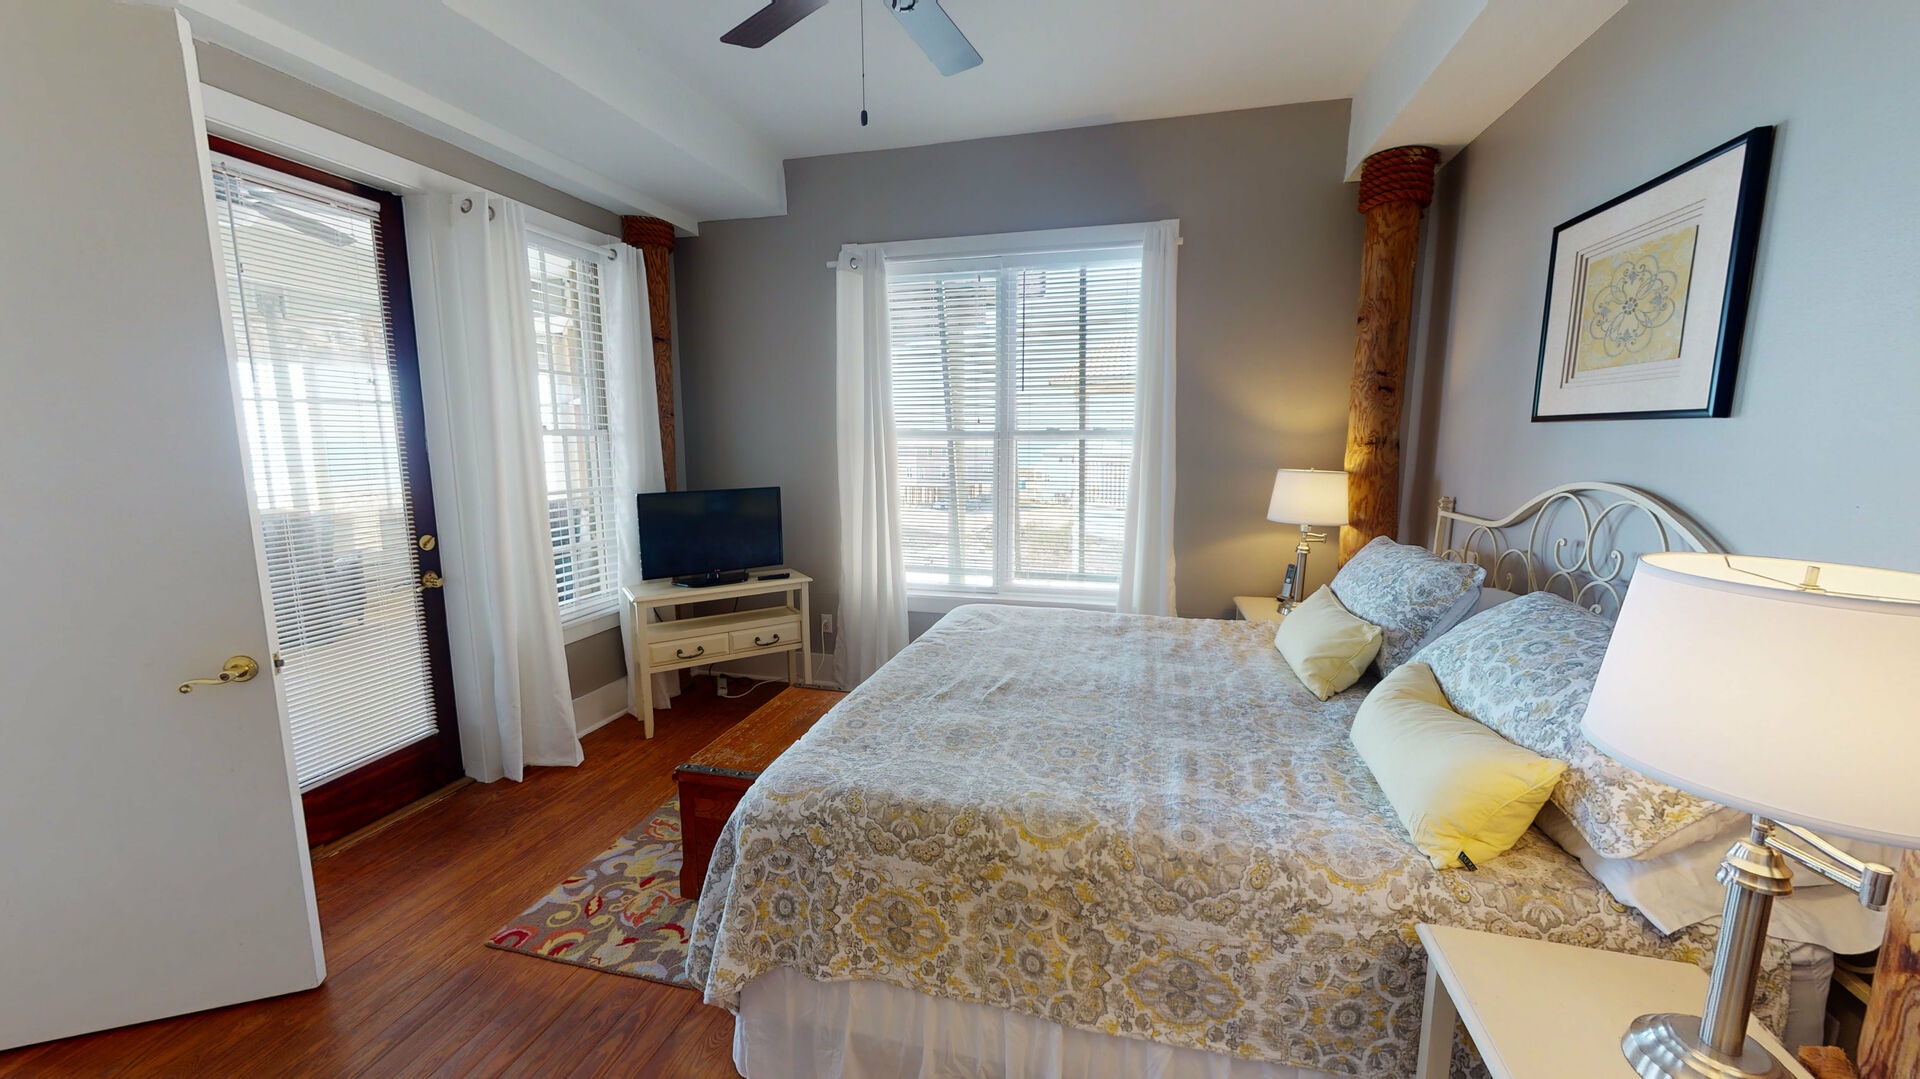 Bedroom 5, 2nd floor, king bed, TV, private bath, access to screened porch with beach views